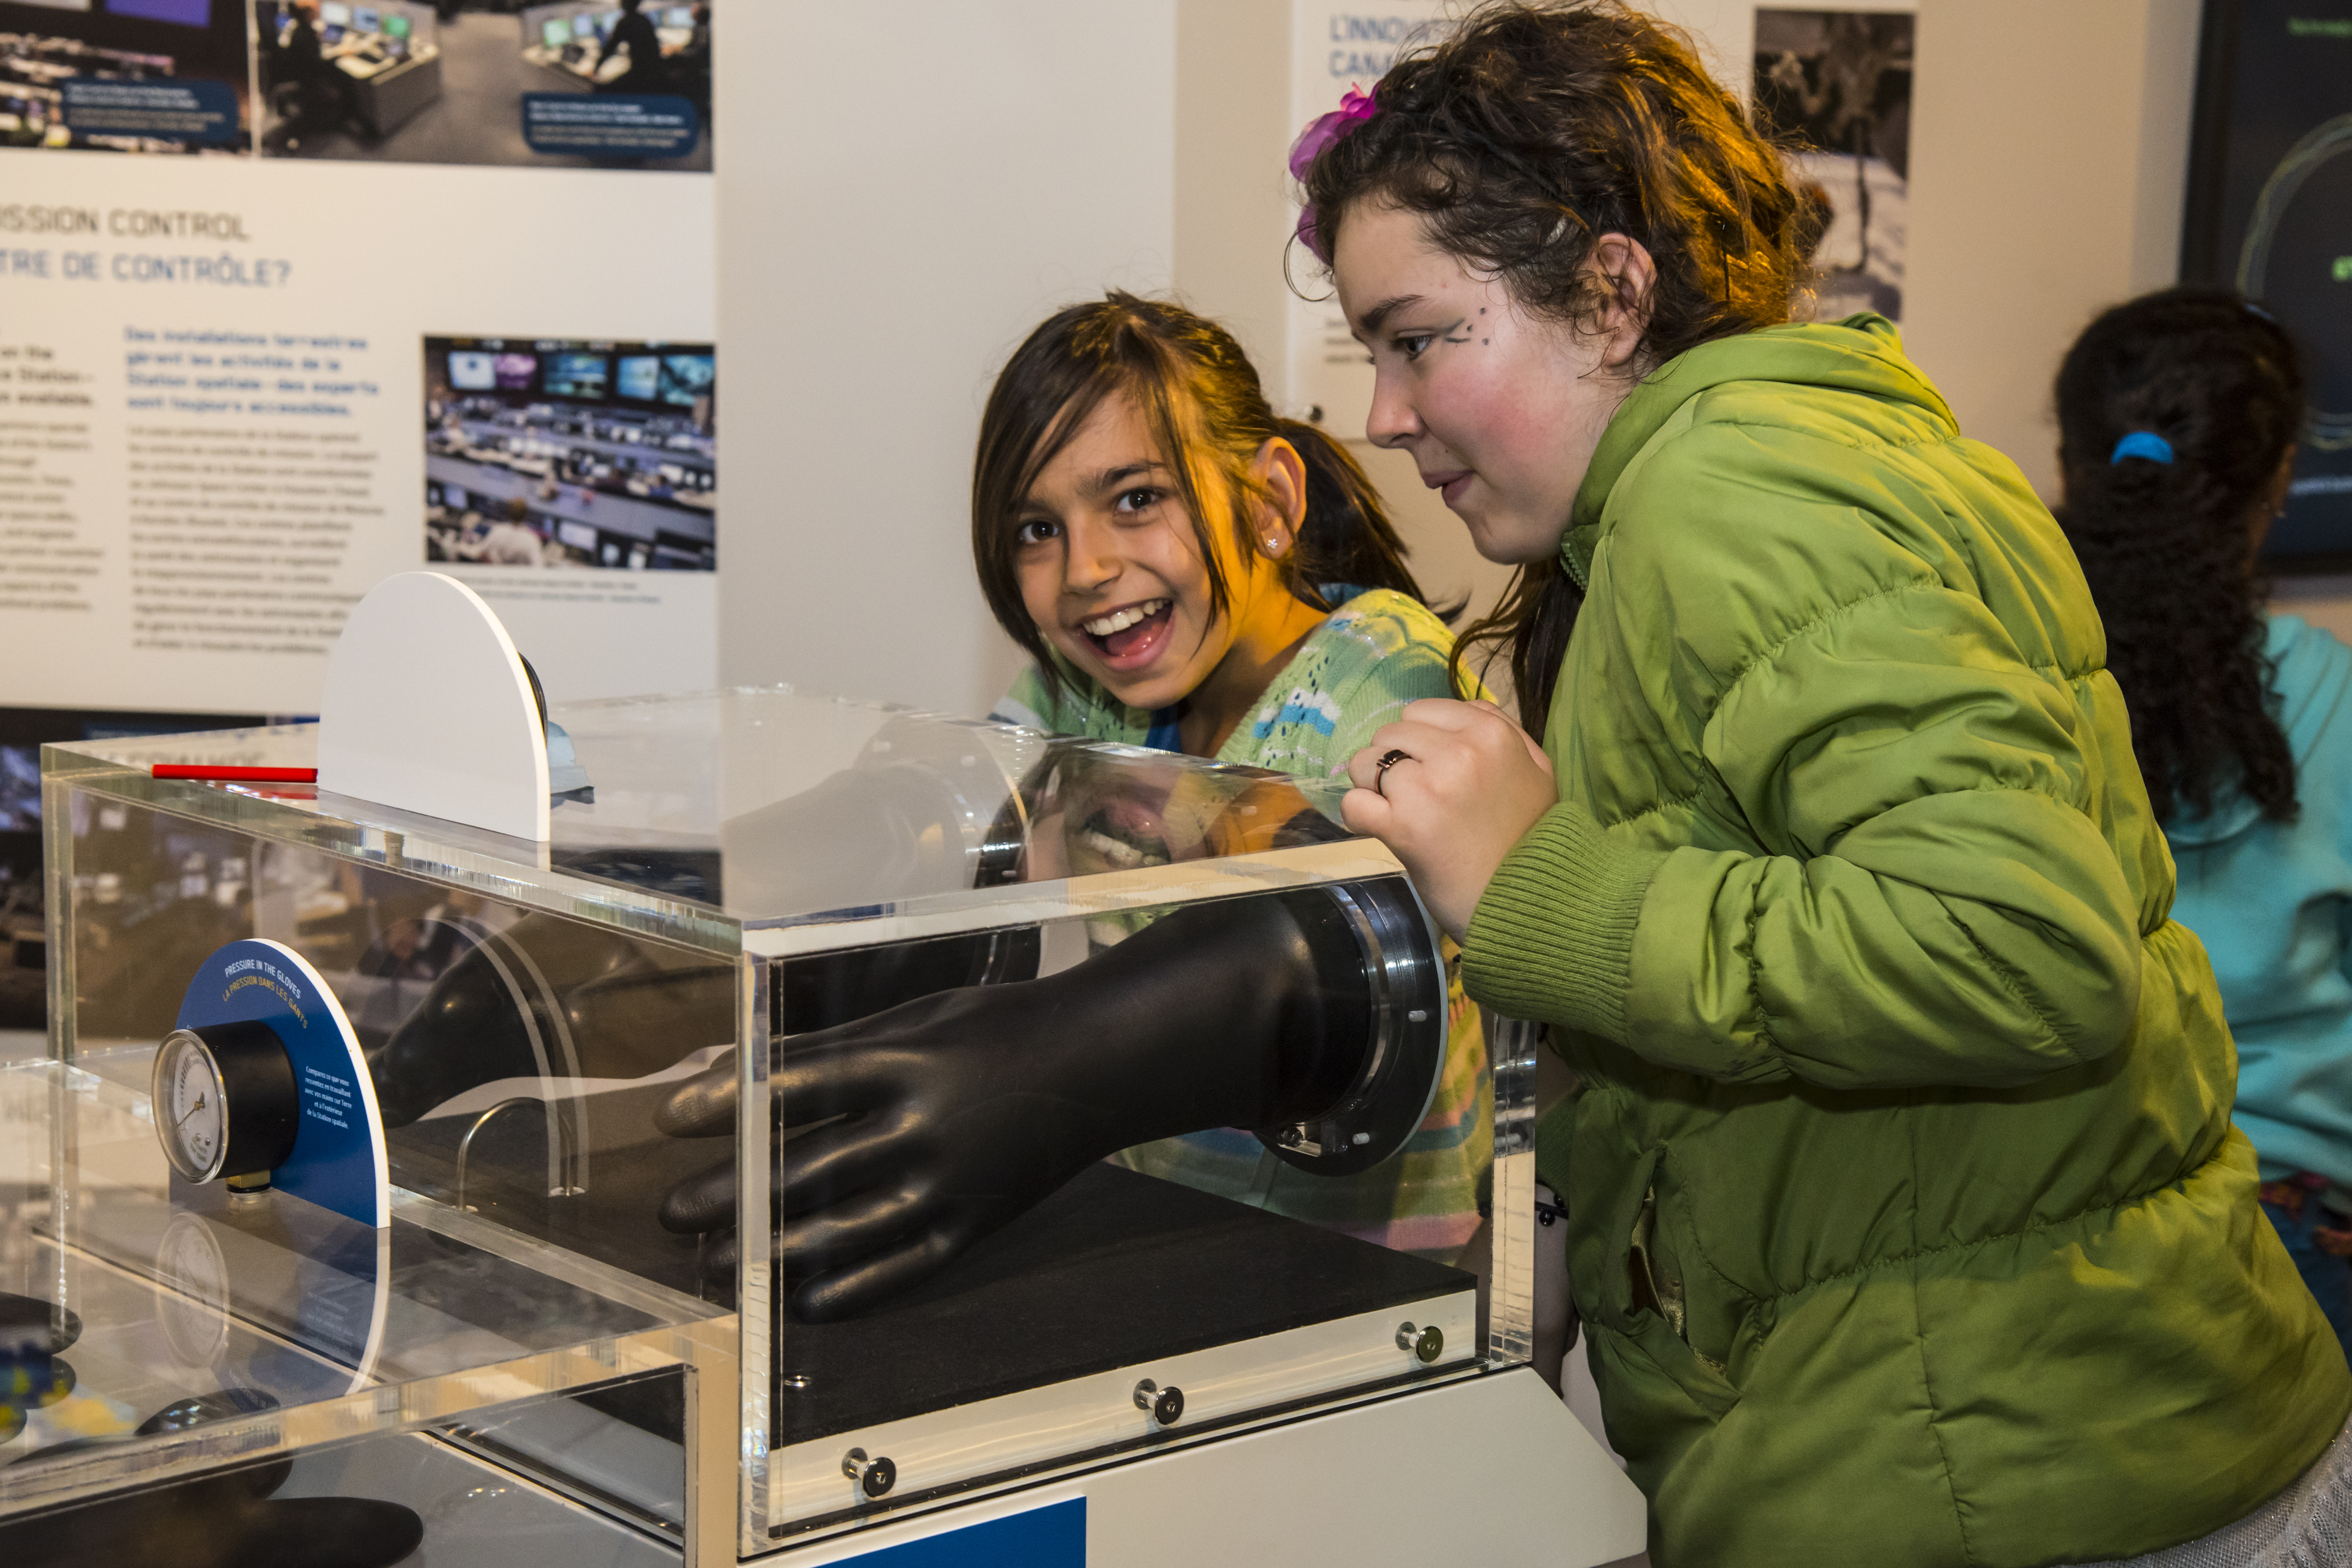 Two young girls stand next to a glass case in a museum; one girl is inserting her hand into a black pressurized glove inside the case.